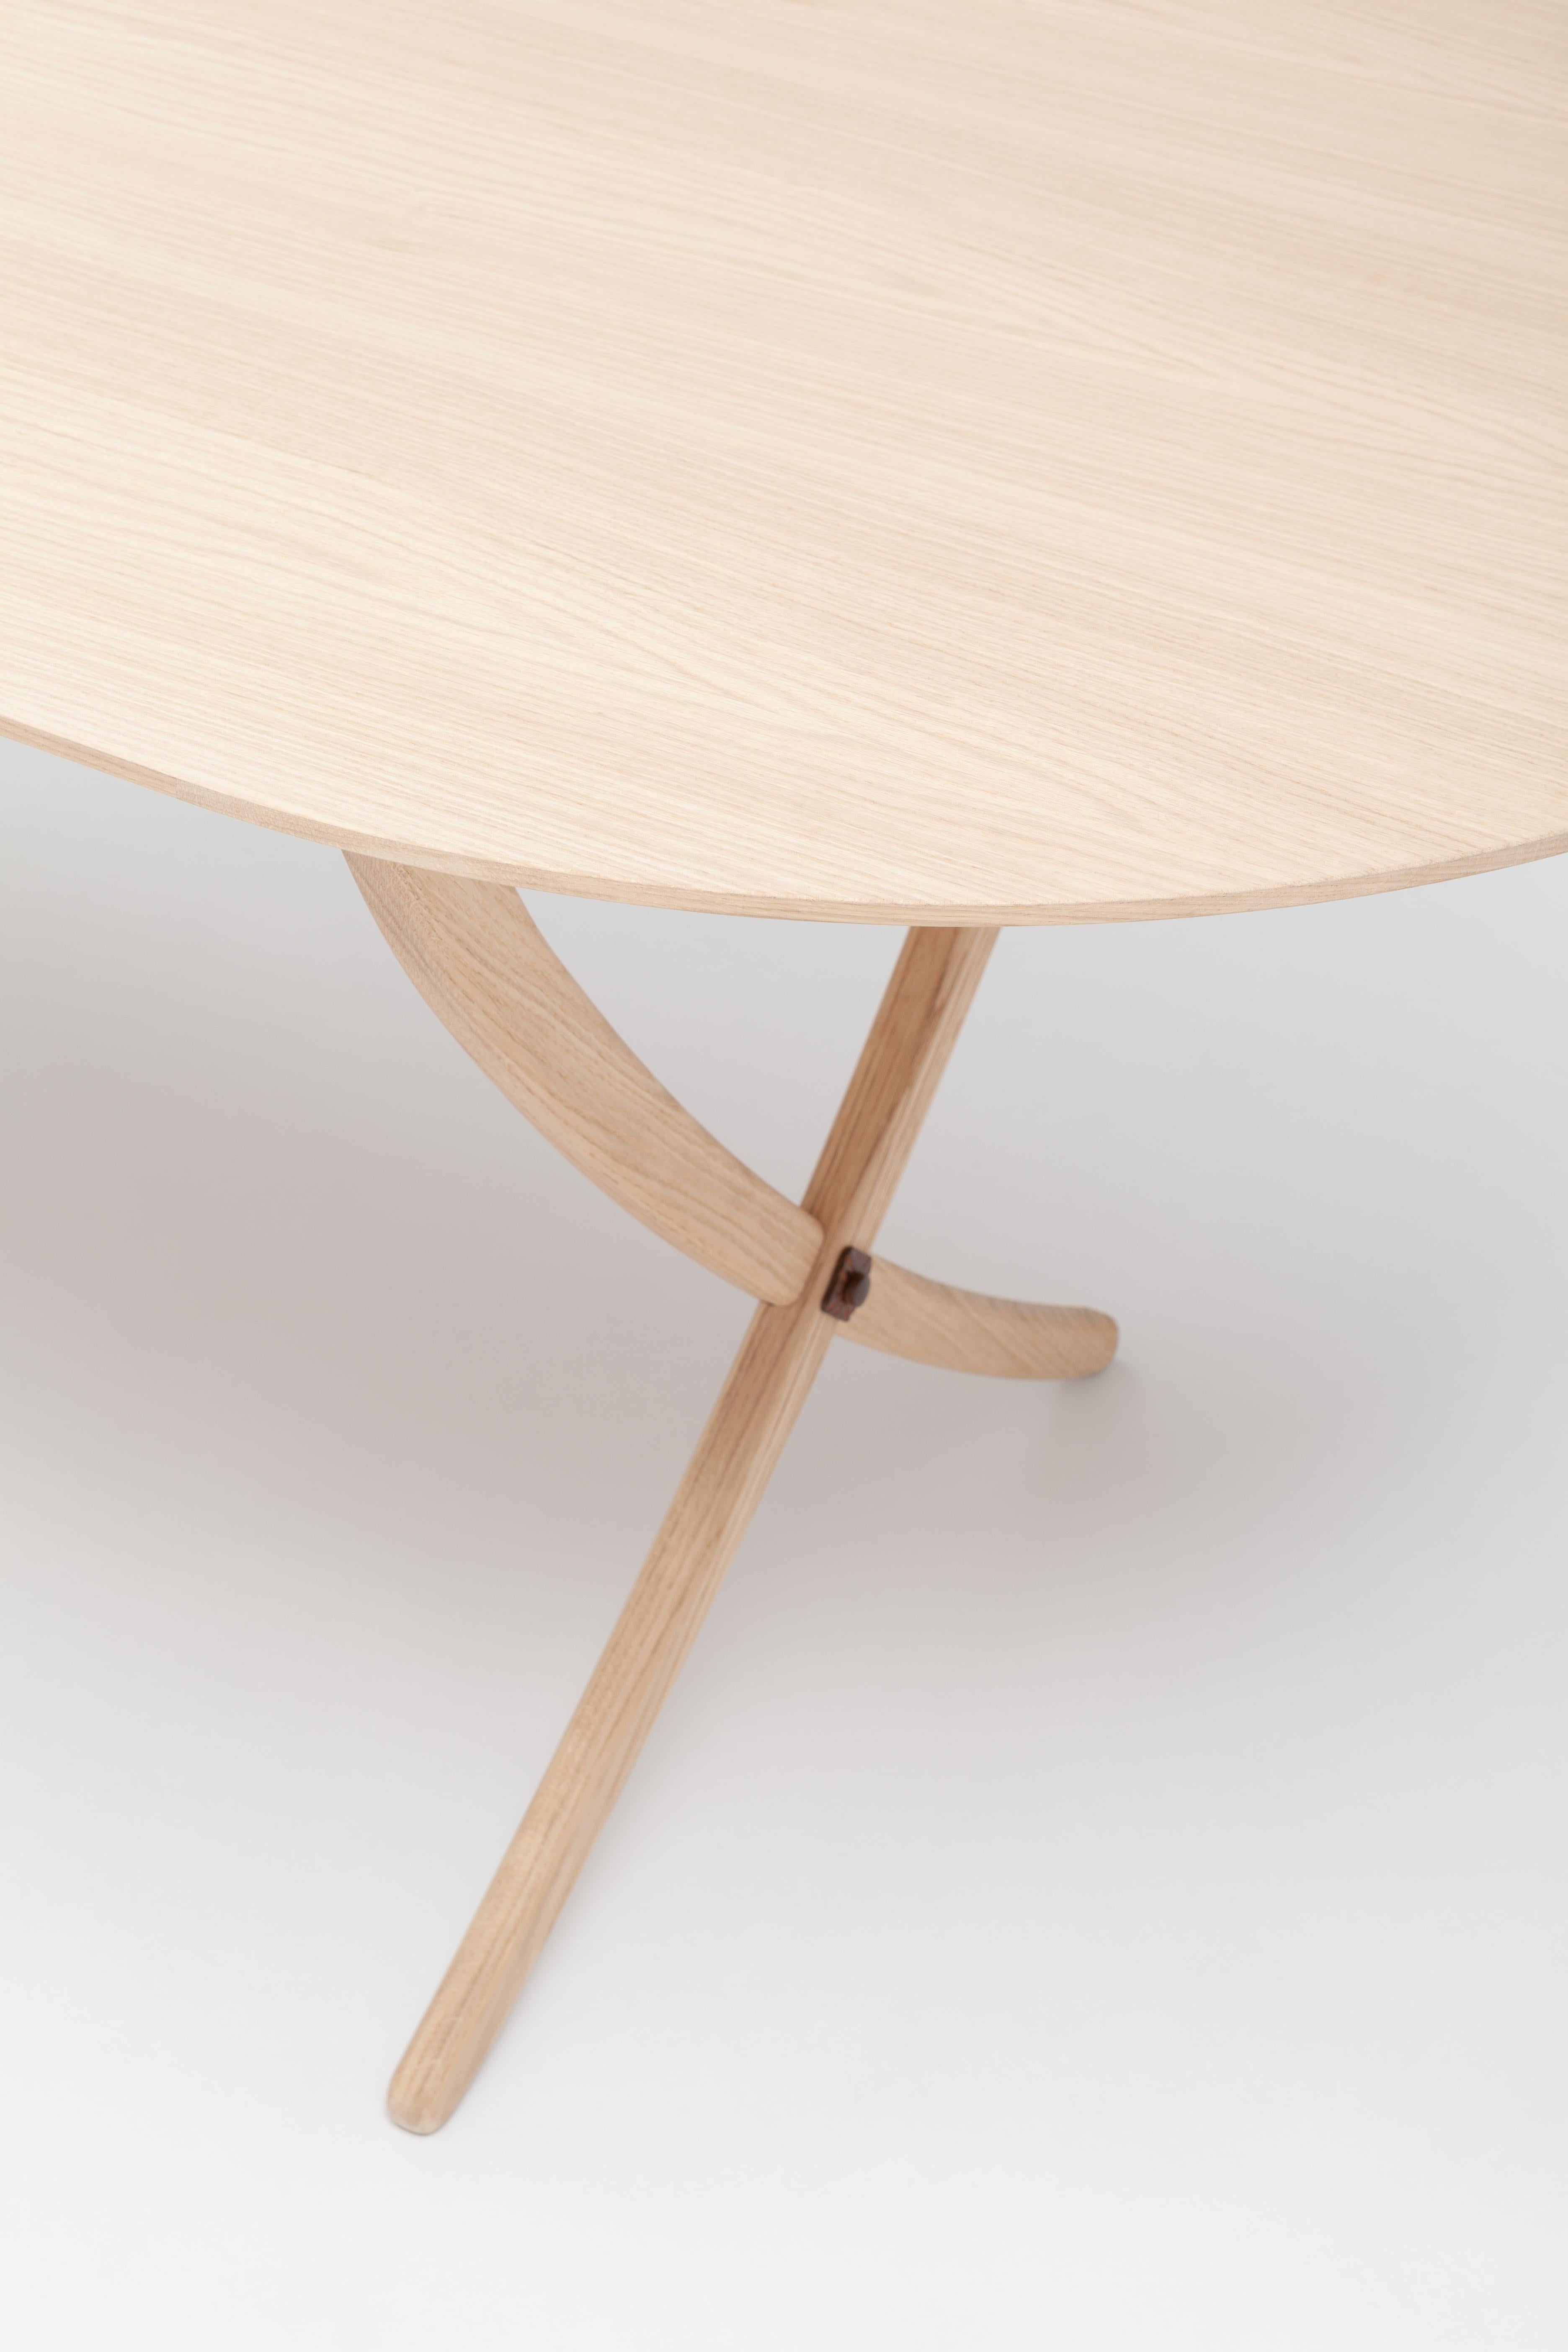 Brushed Arch Table small, durmast dining table For Sale